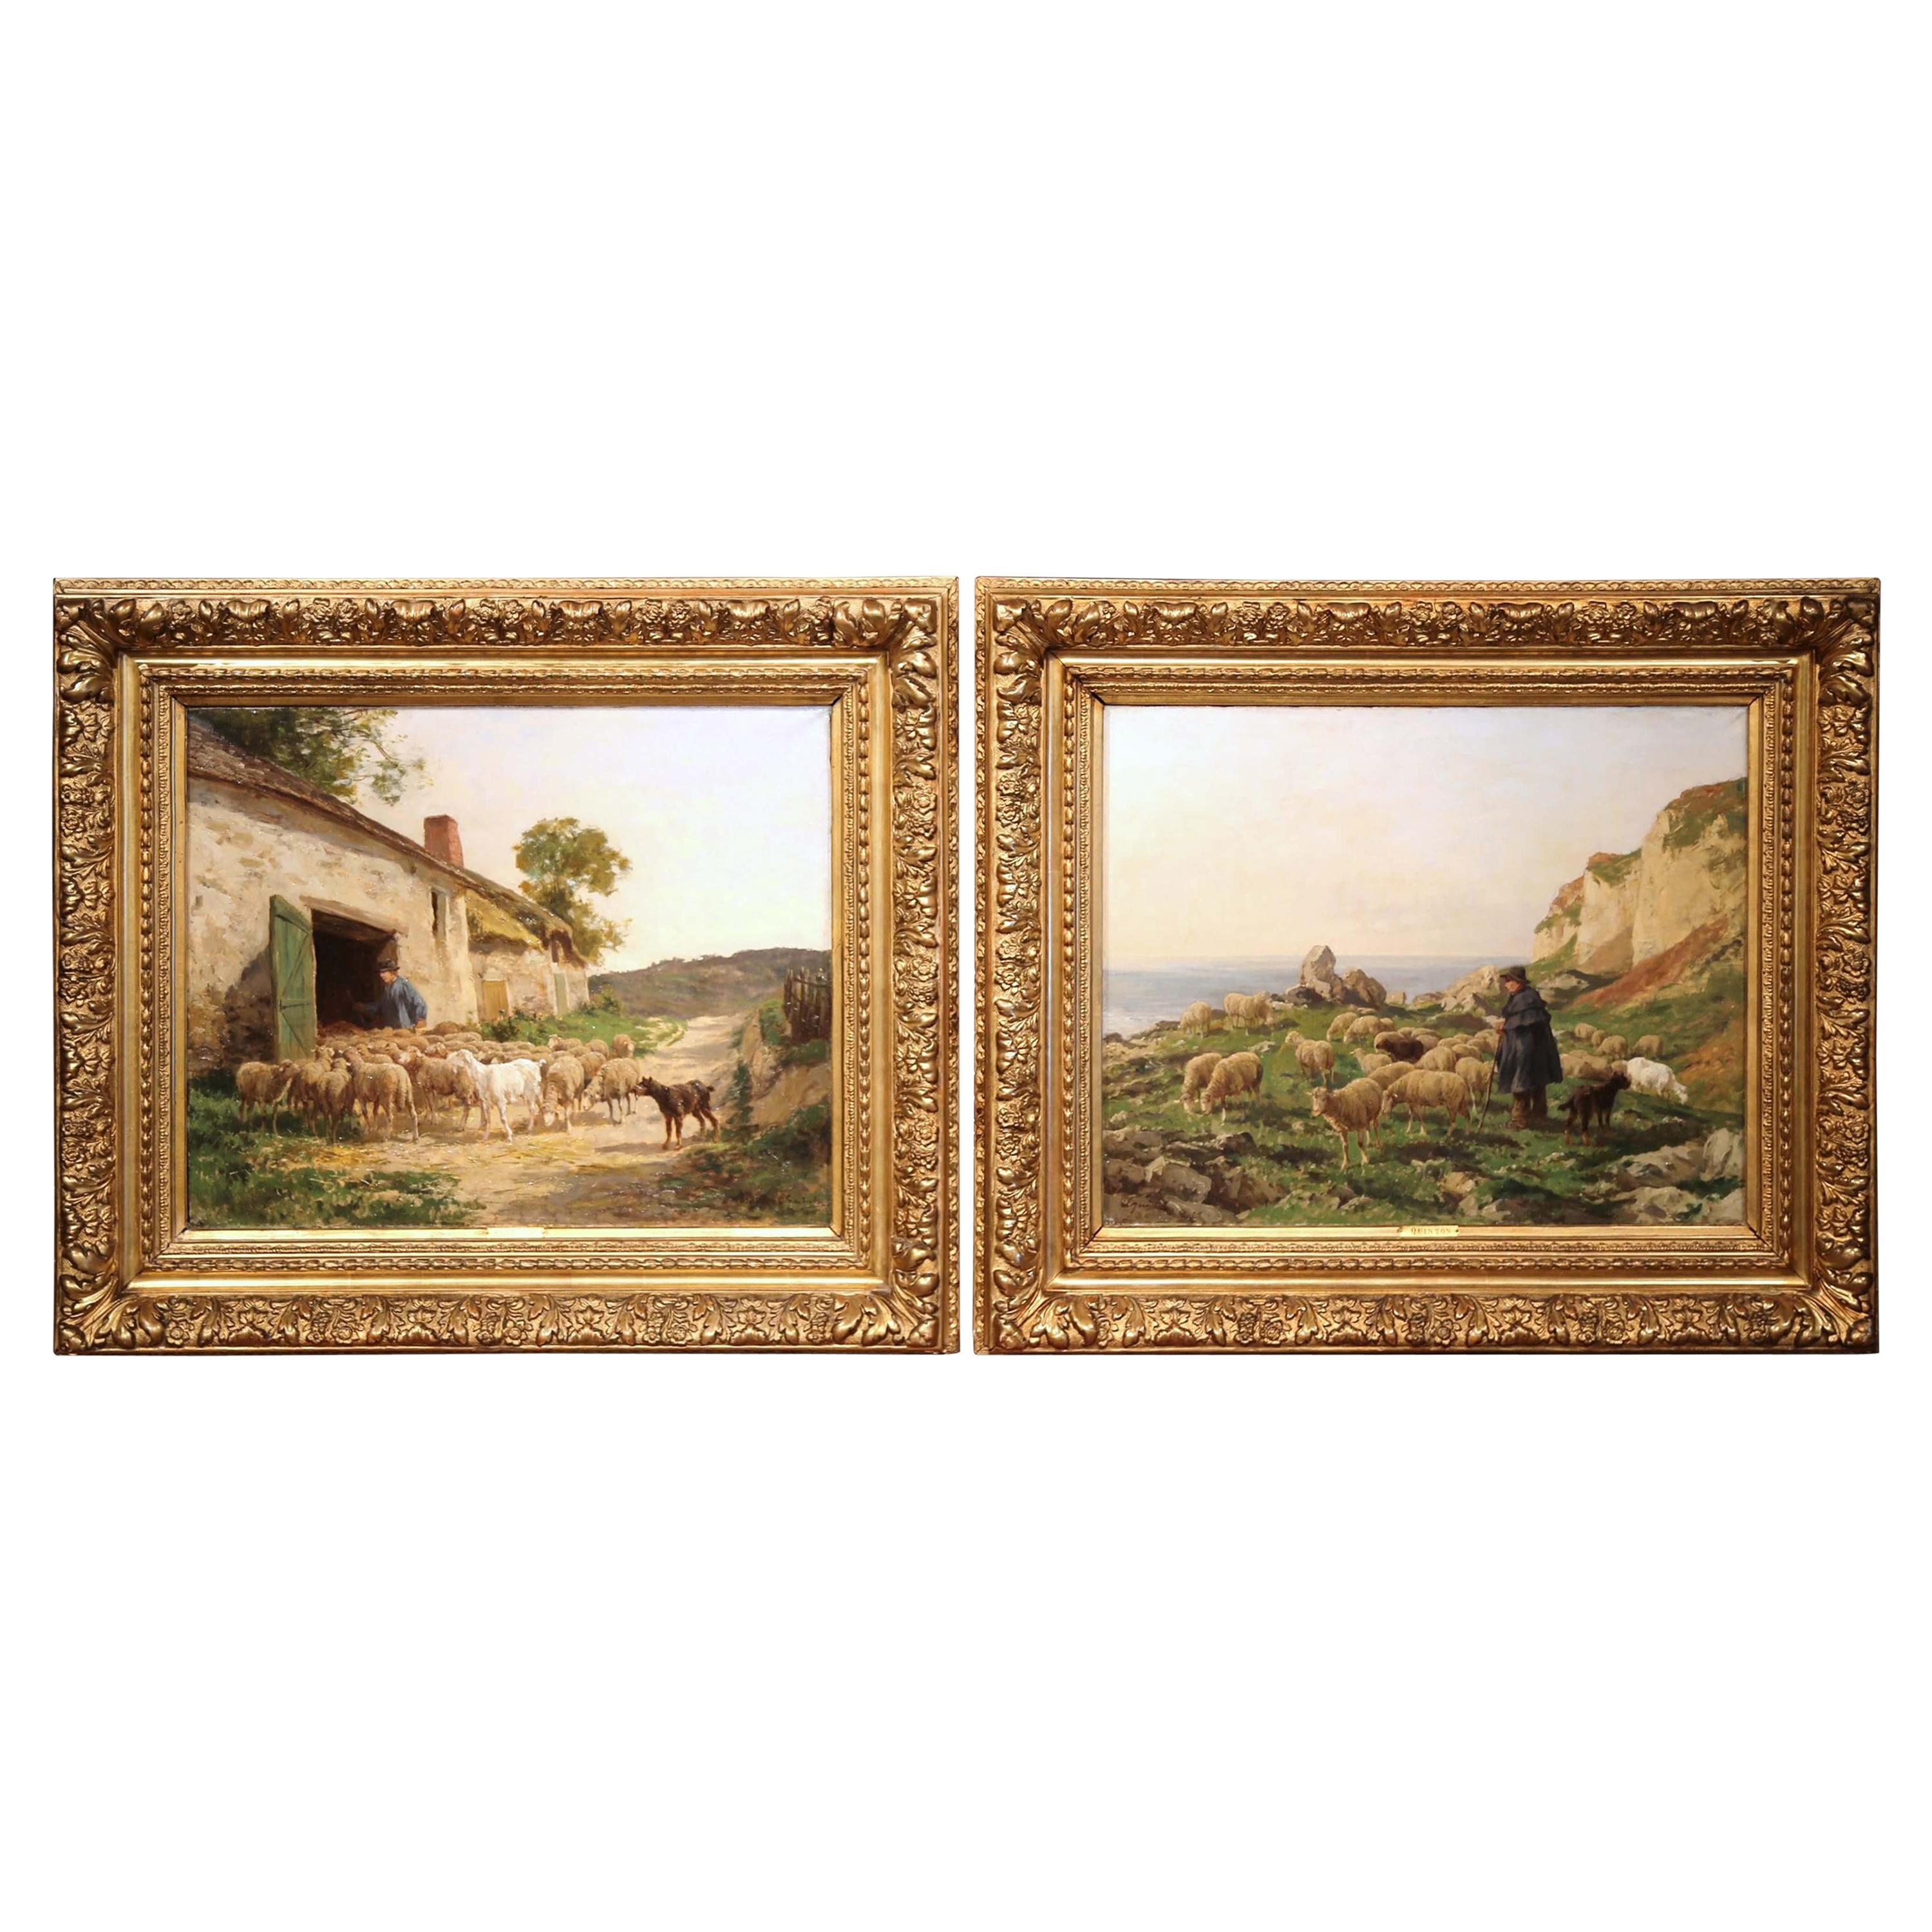 Pair of 19th Century French Sheep Oil Paintings in Gilt Frames Signed C. Quinton